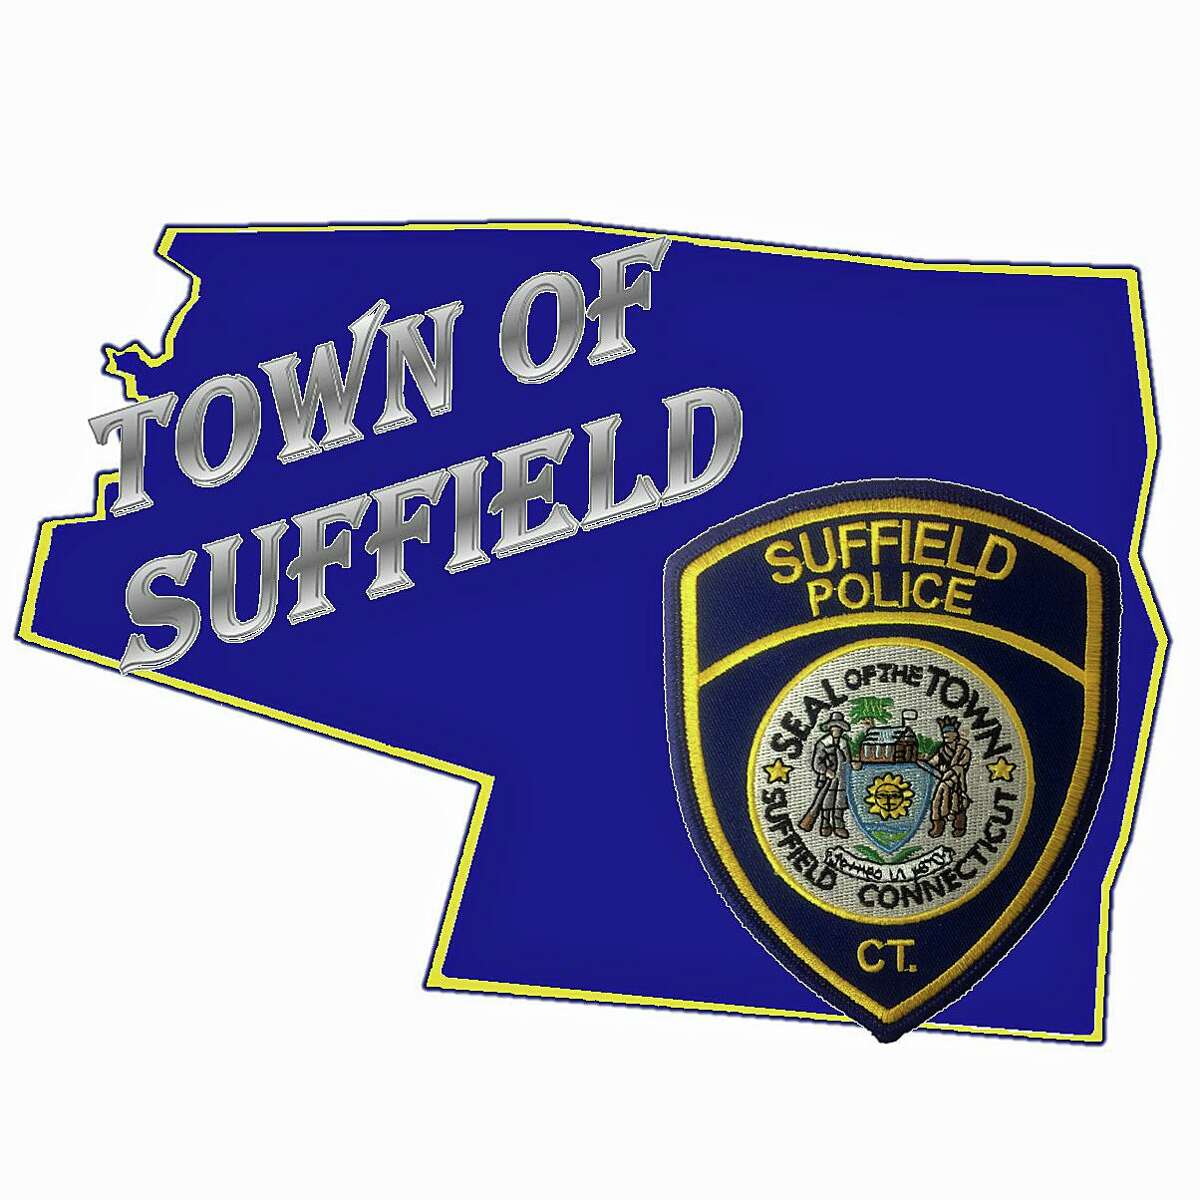 A contractor working at a house in Suffield inturupted a vehicle burglary on Friday morning and end up having a gun pointed at him, police said.